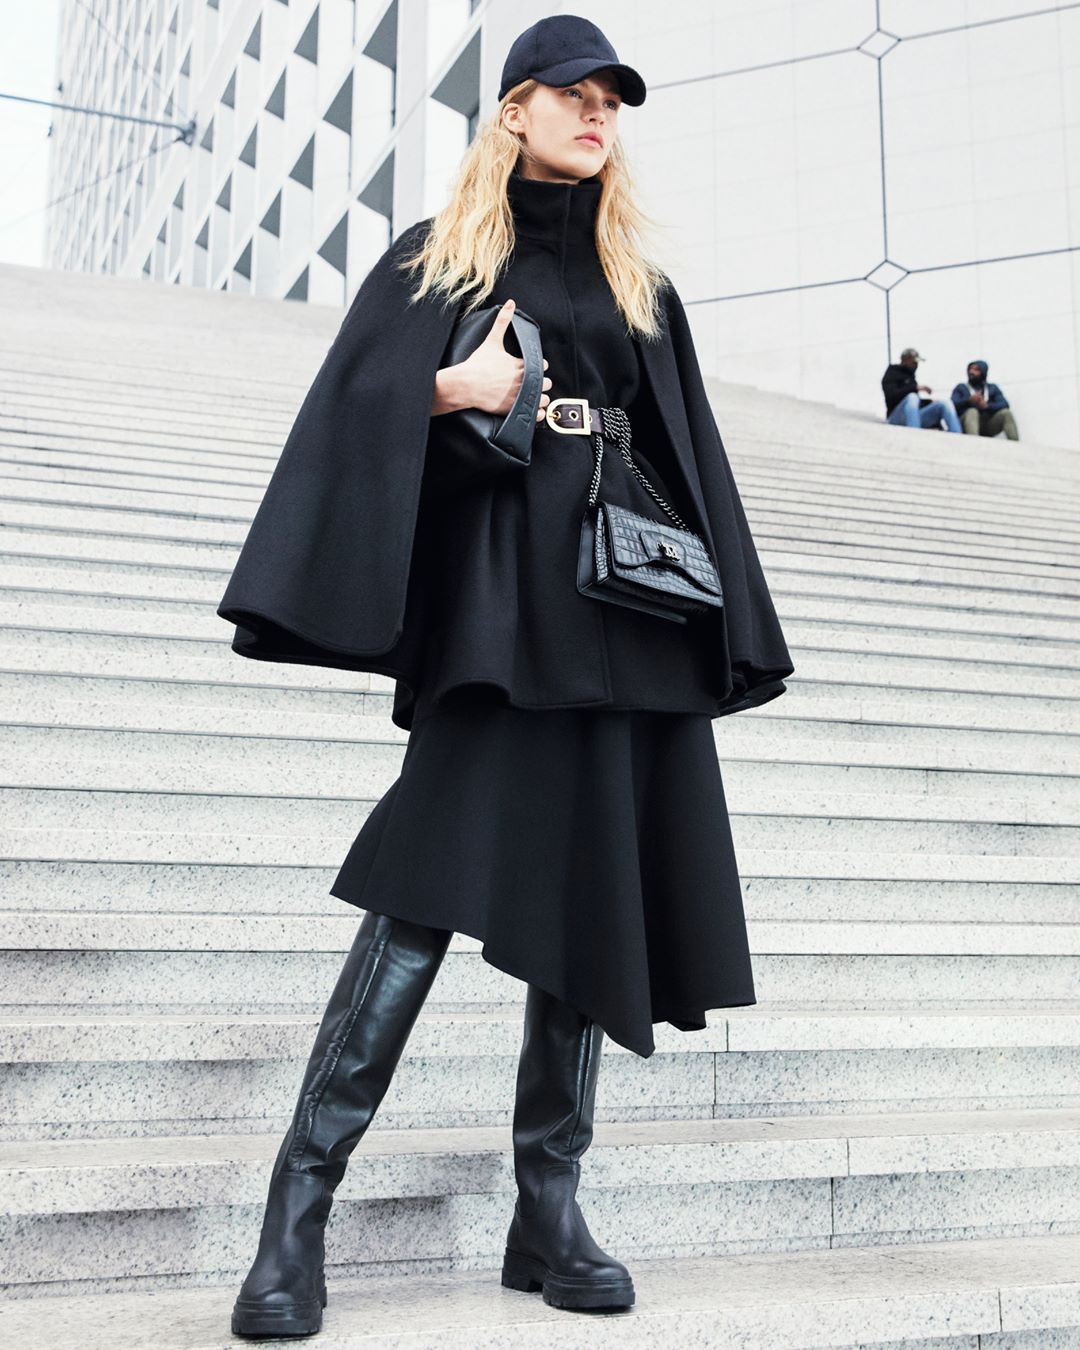 Max Mara - Back to black. Create a sleek silhouette with the new versions of the #MaxMaraFW20 total black shoulder bag and clutch, paired with knee-high leather boots and #MaxMara #FW20 ready-to-wear.